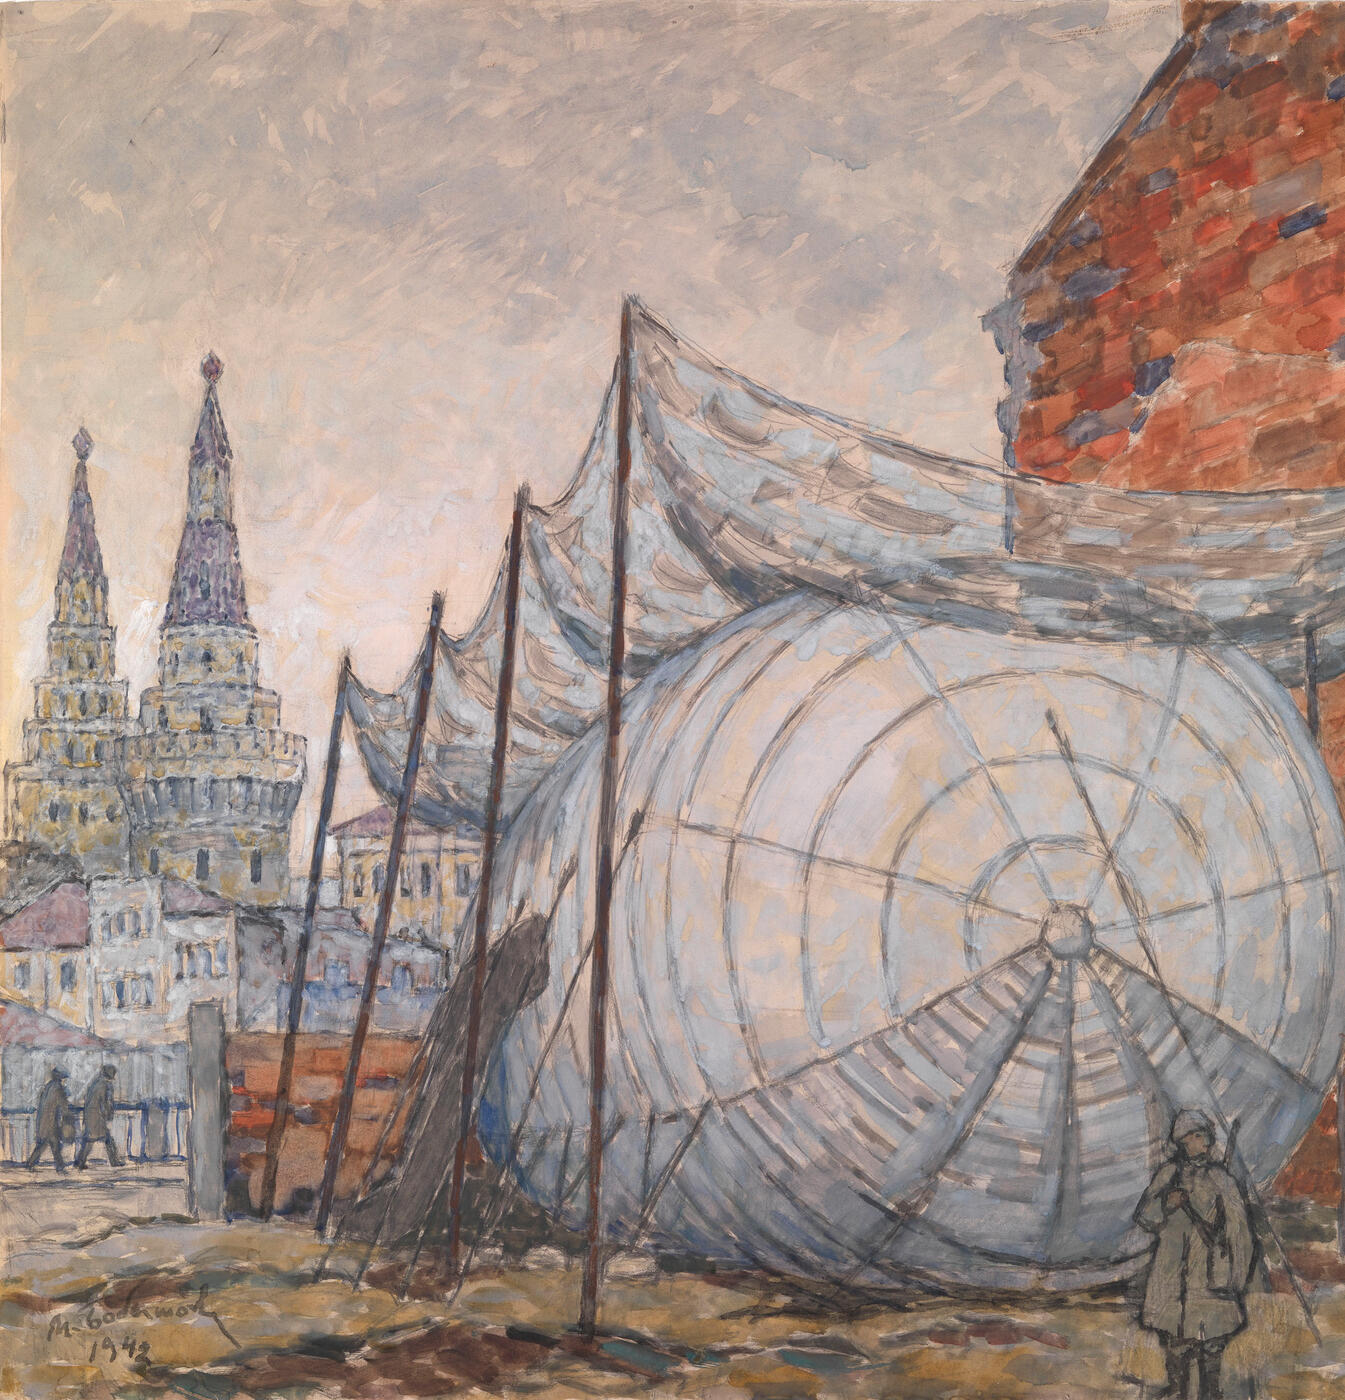 Barrage Balloon, from the Series "Moscow During the Days of Victory"